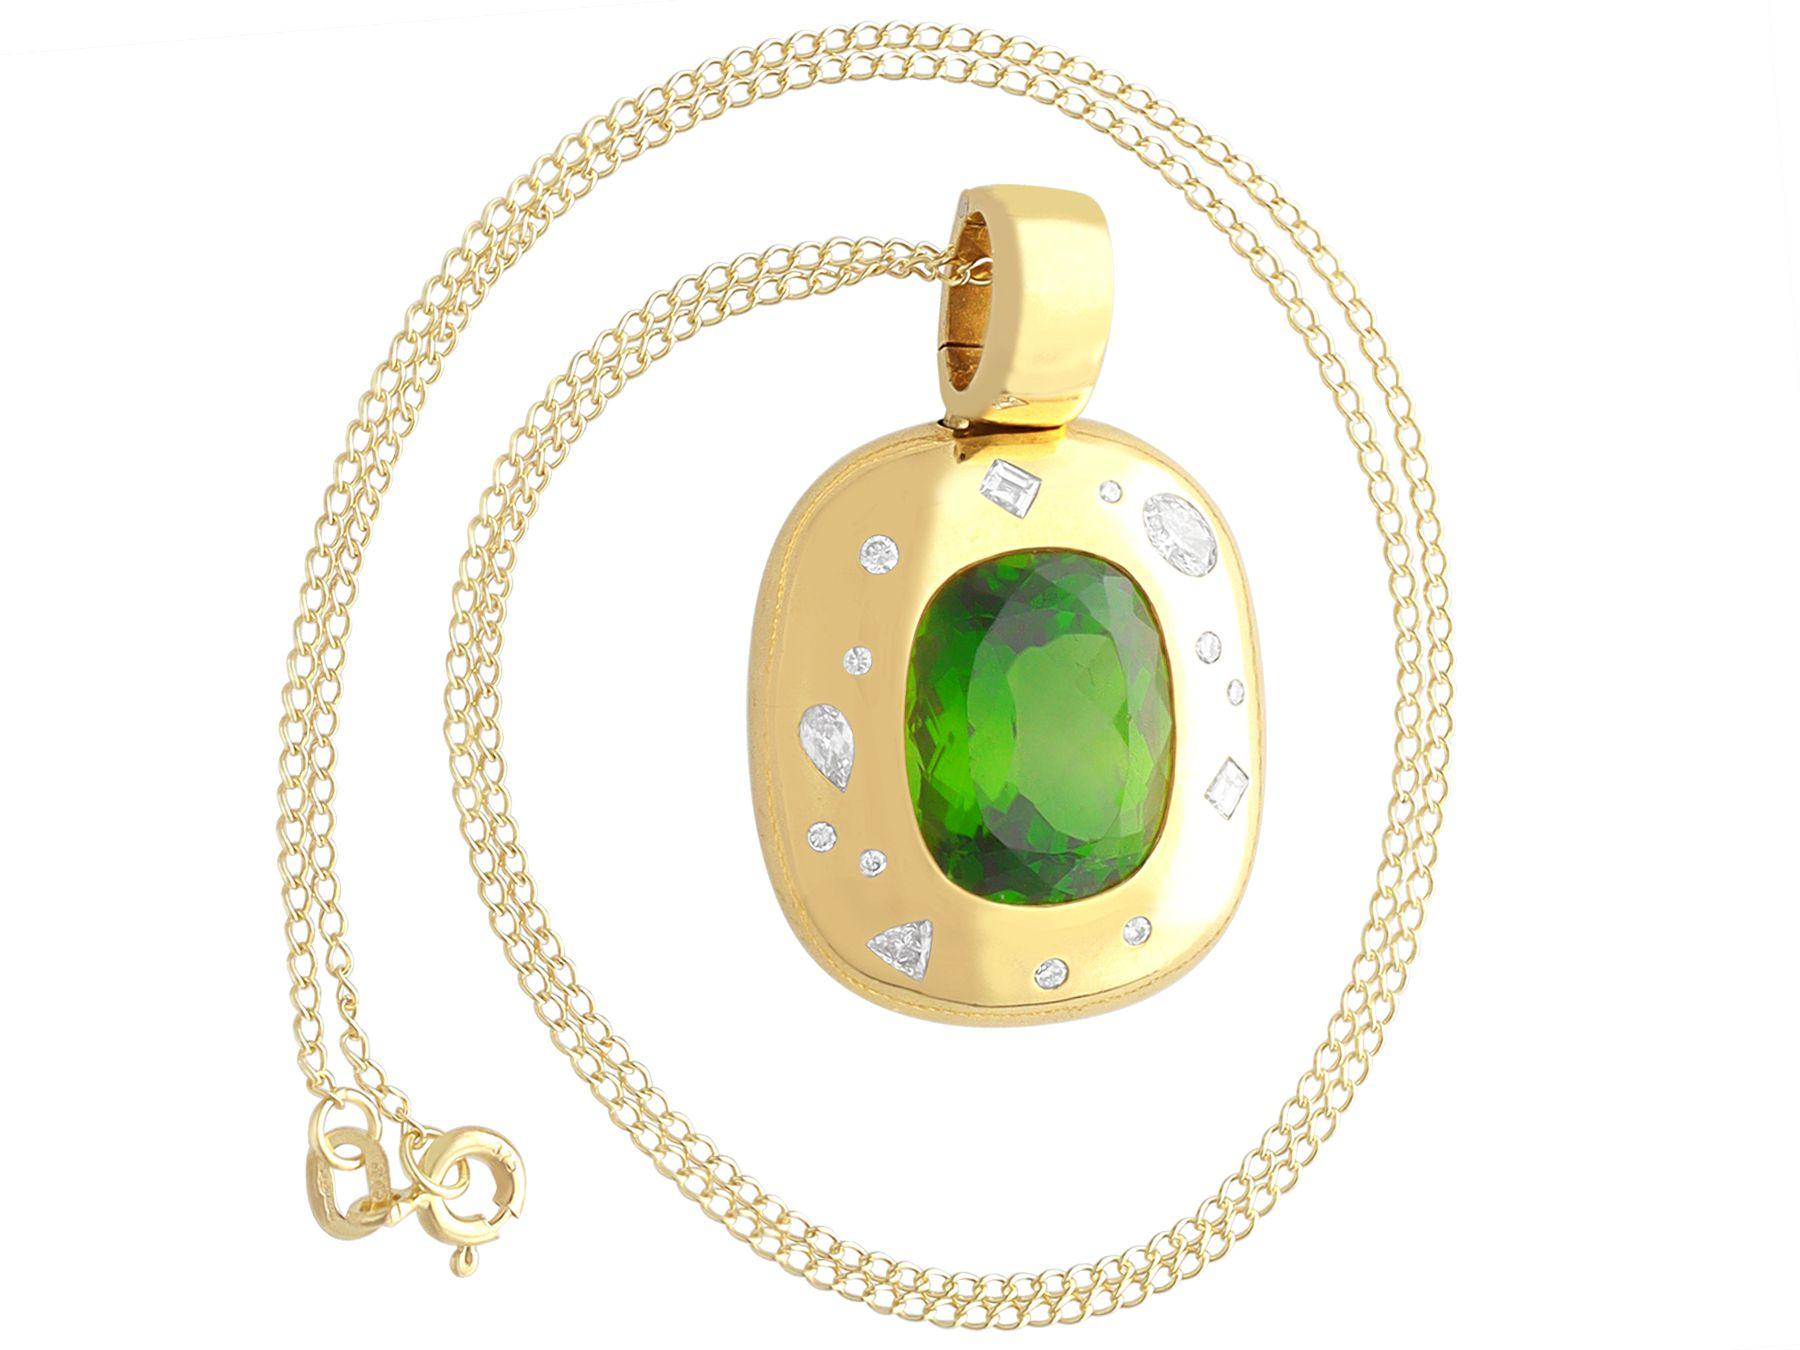 A stunning, fine and impressive 13.94 carat tourmaline and 0.79 carat diamond, 18 karat yellow gold pendant; part of our diverse gemstone jewellery collections.

This stunning, fine and impressive vintage pendant has been crafted in 18k yellow